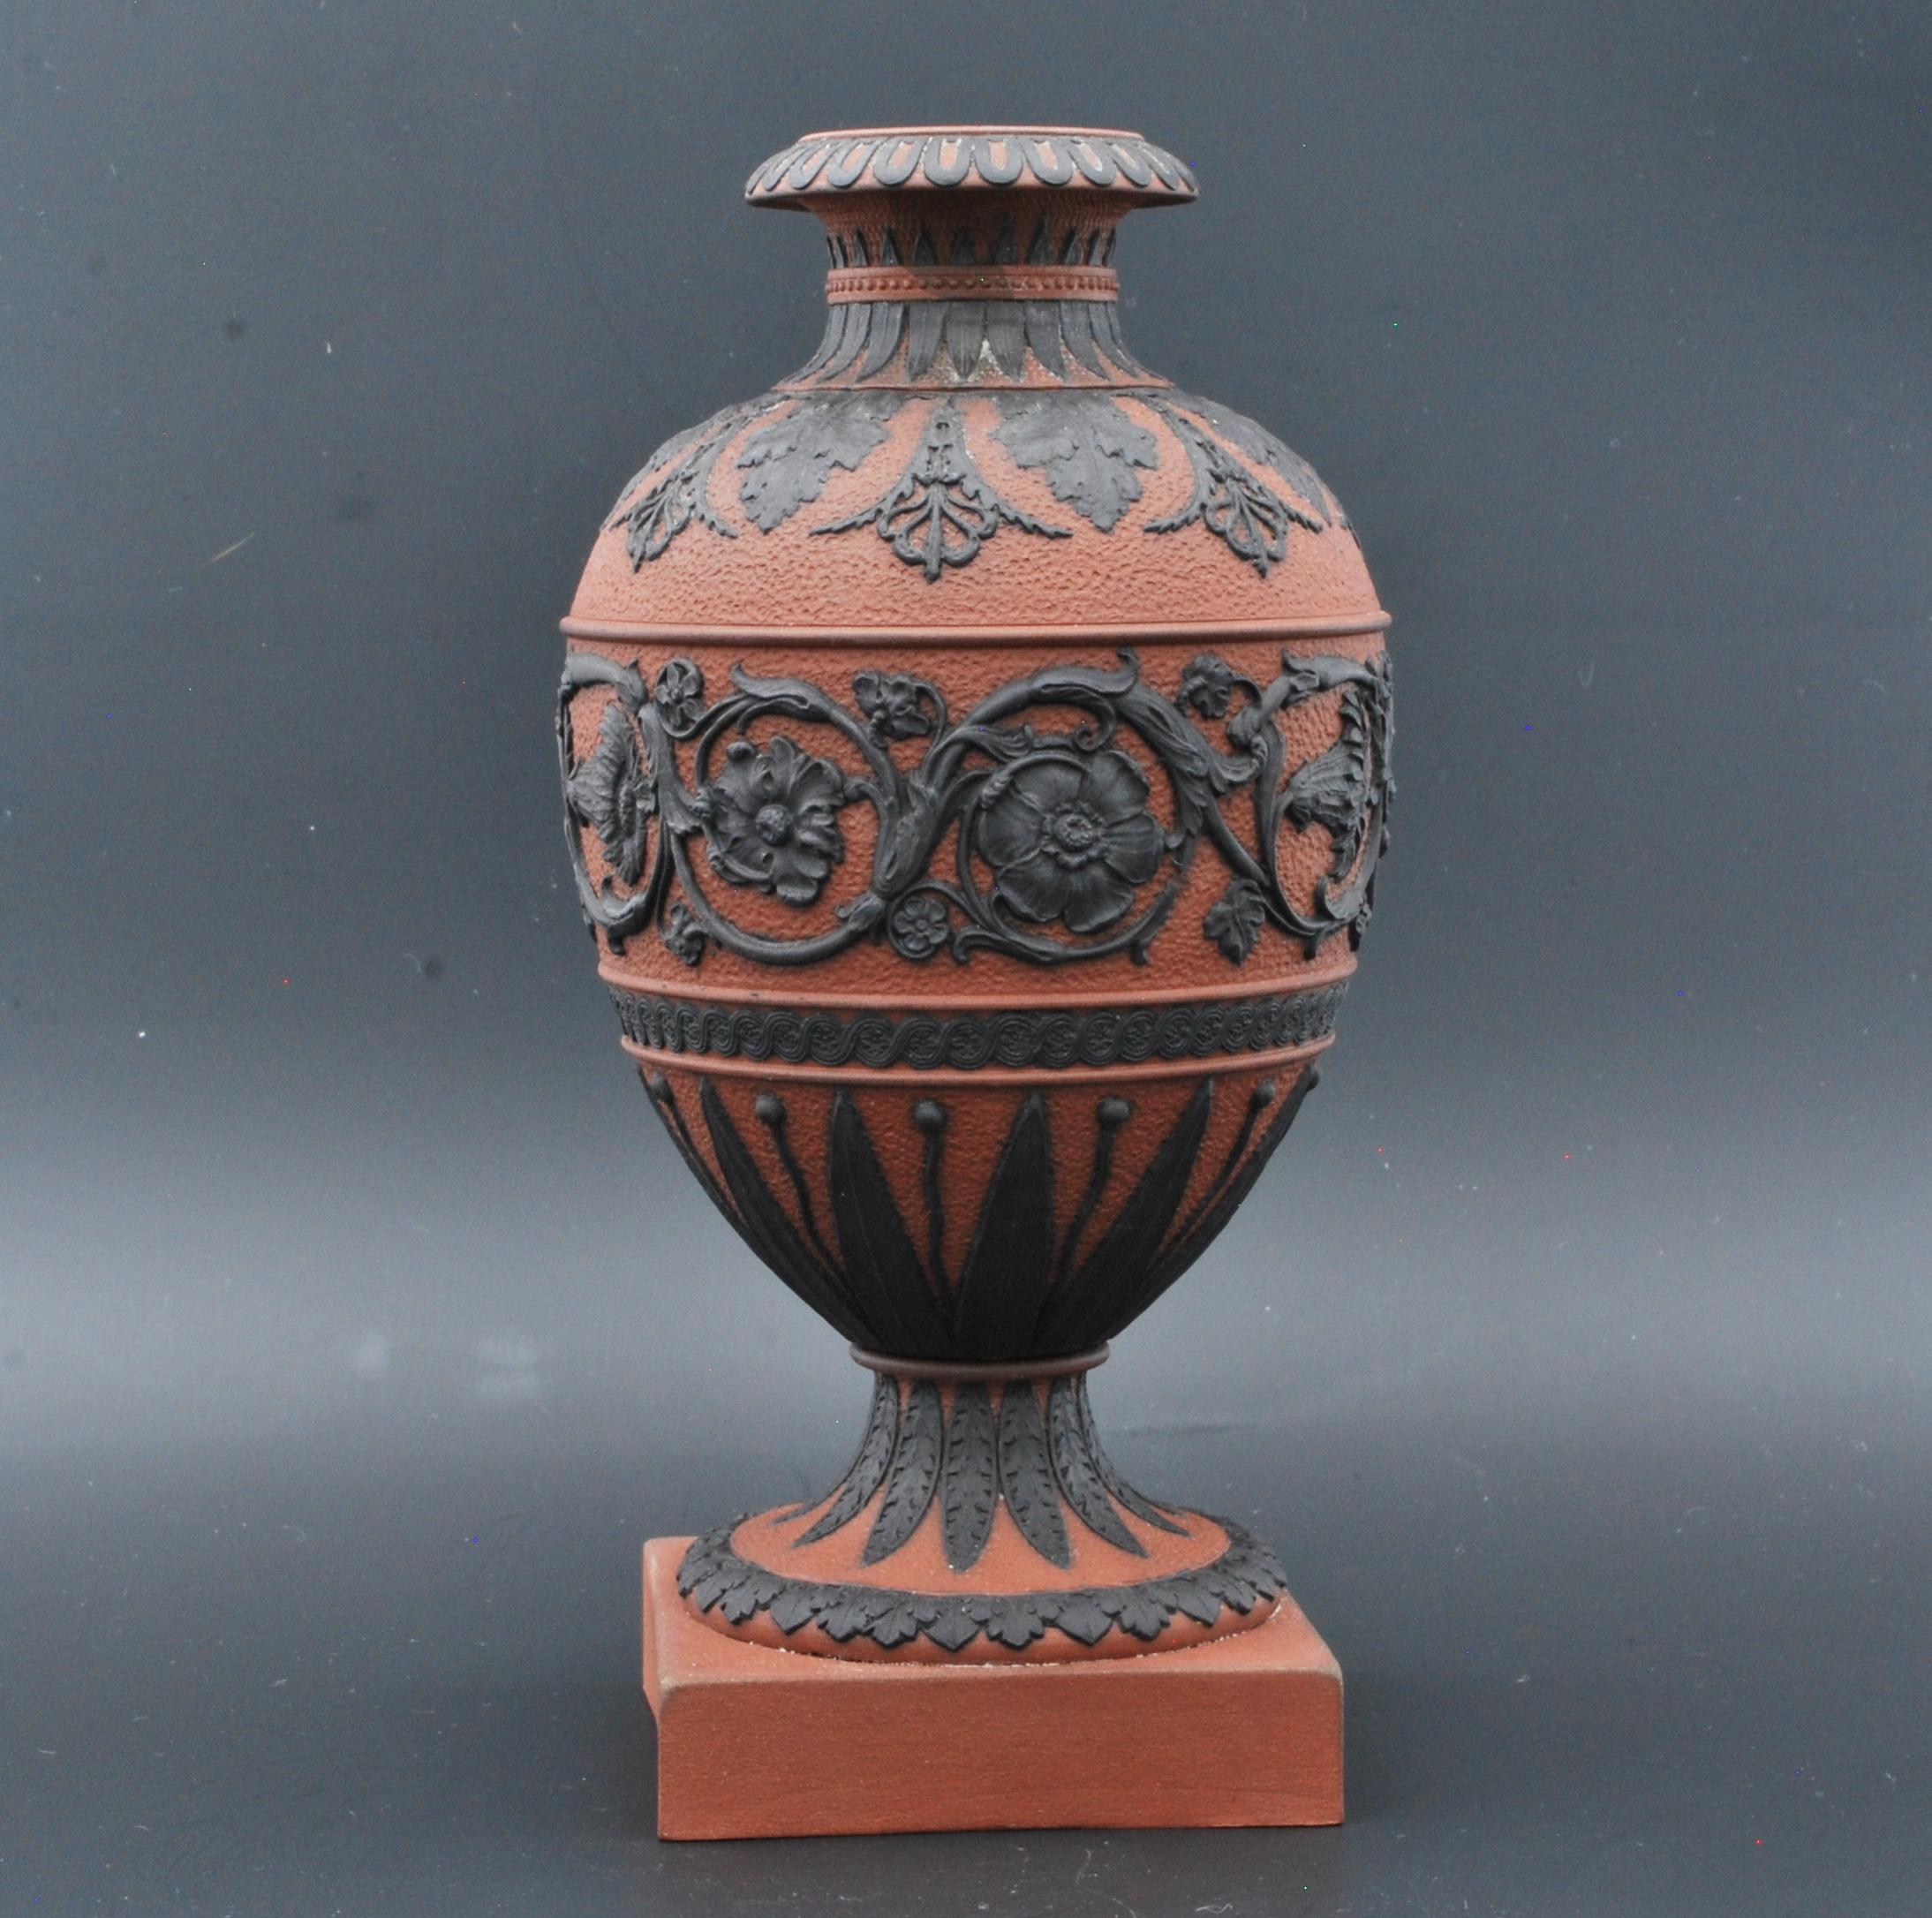 A most attractive vase in Rosso Antico, decorated in black basalt with Arabesque on a dimpled ground. The colour of early Rosso is quite different to the 19th century orange body.